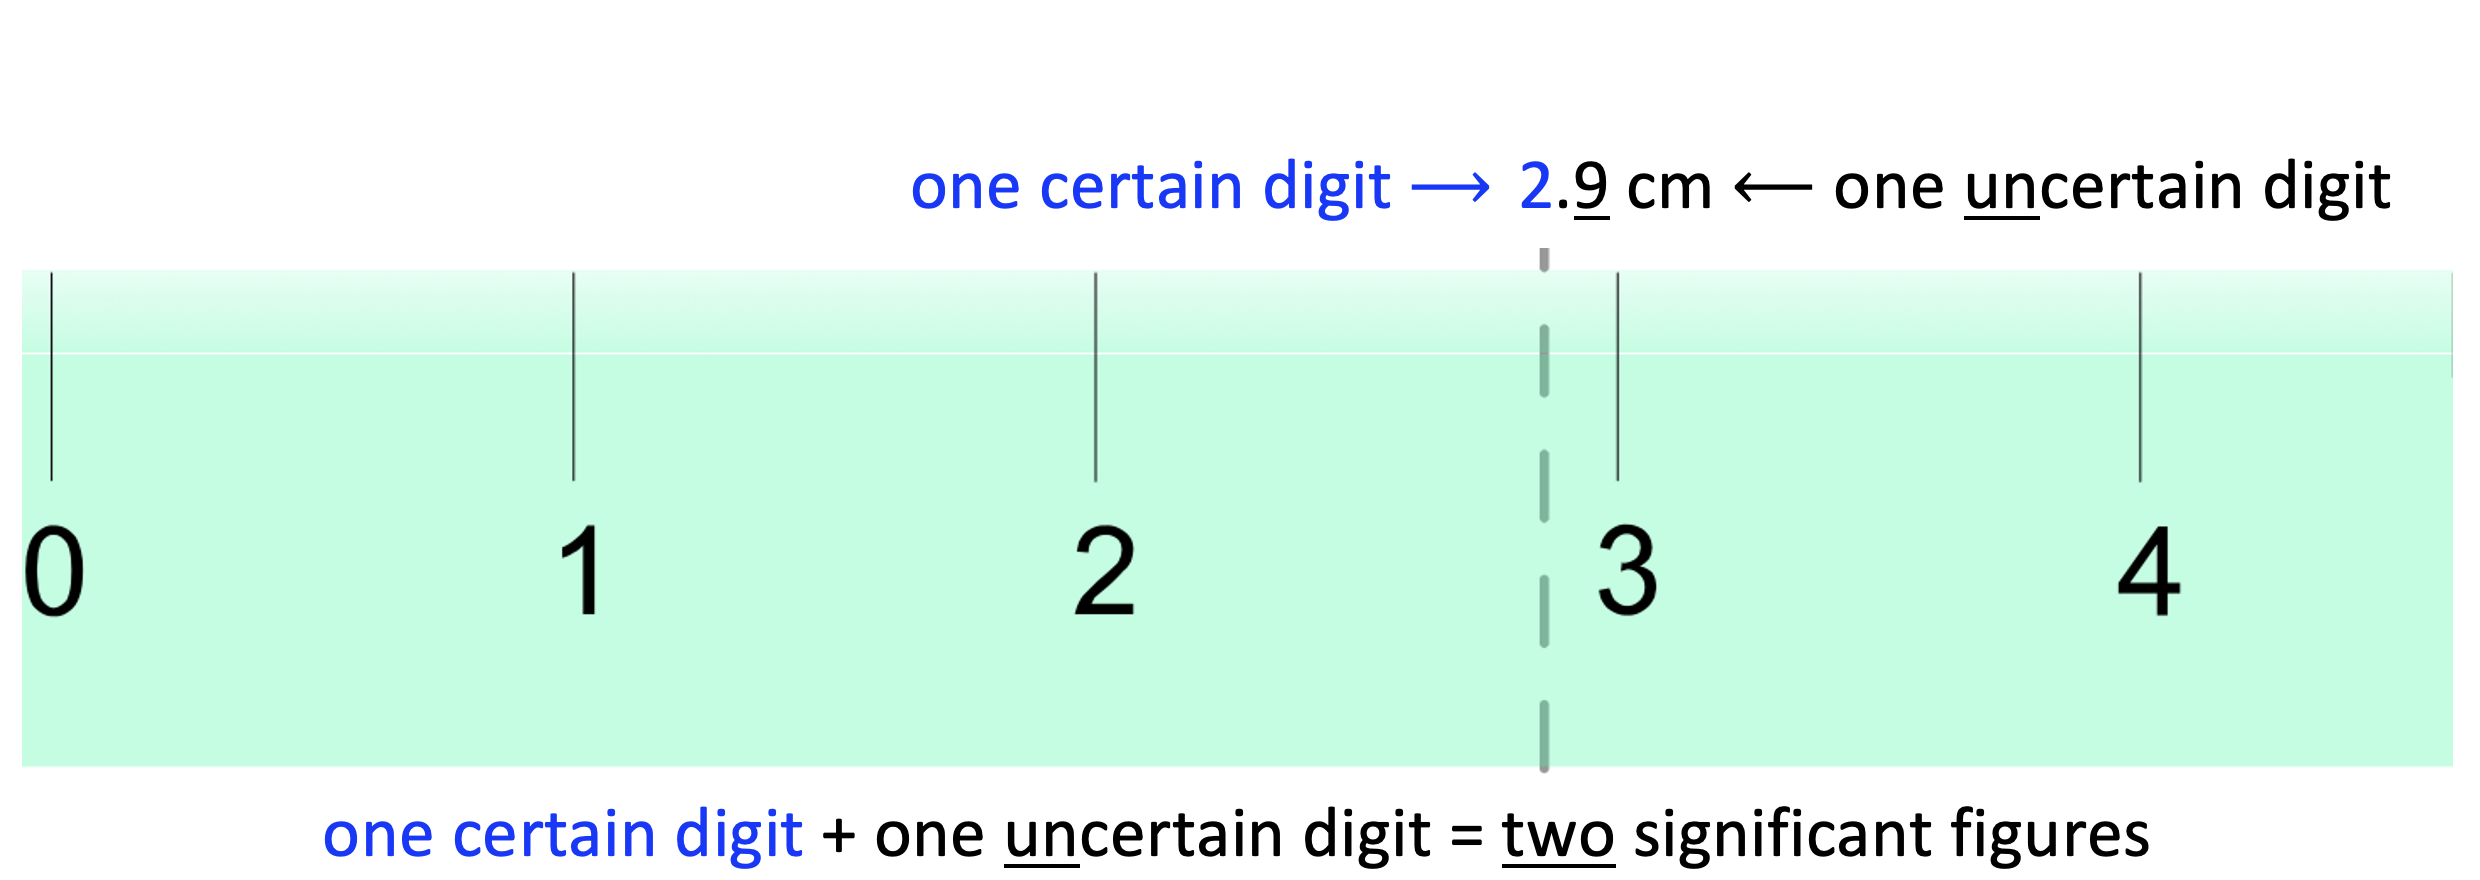 Ruler showing that one certain digit plus one uncertain digit equals two significant figures.